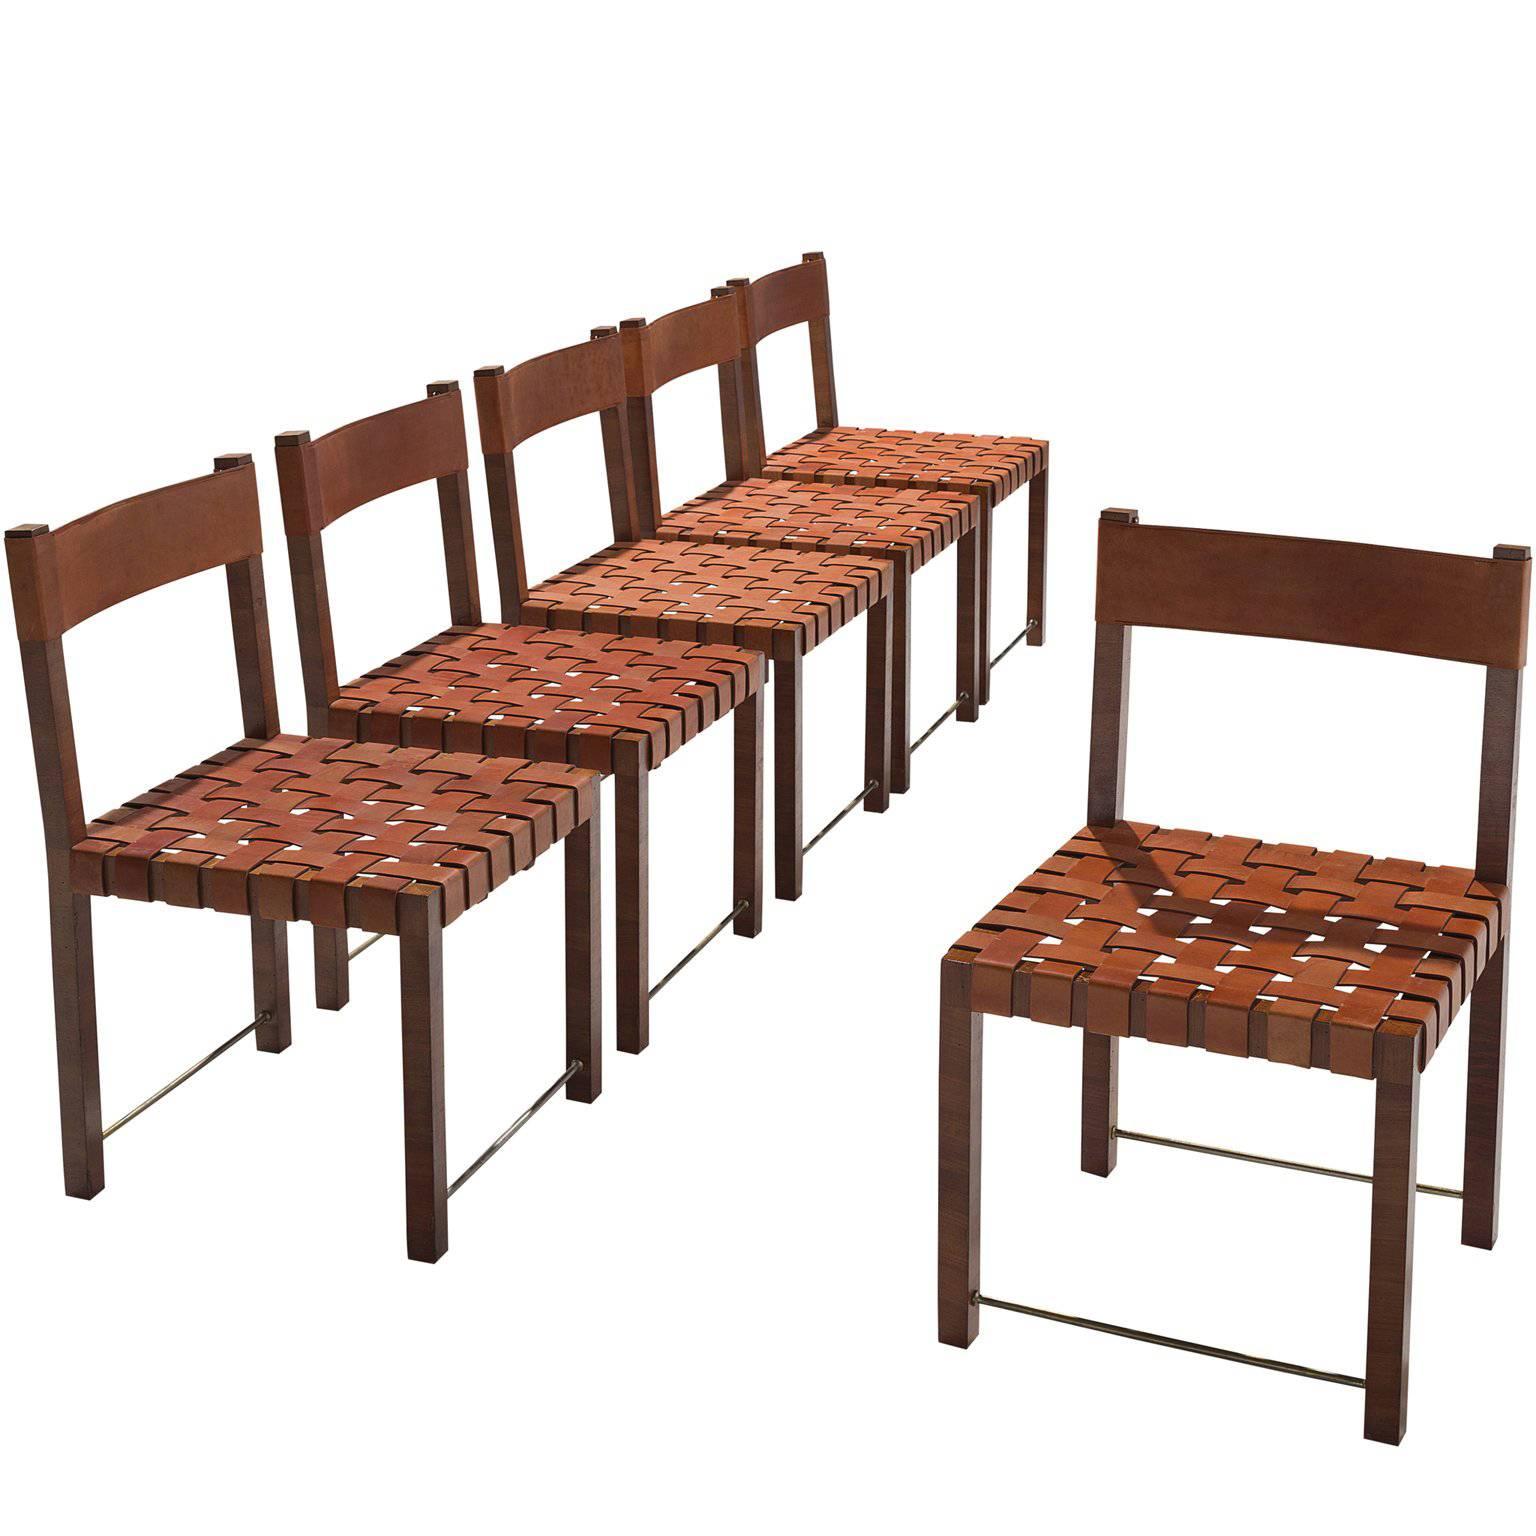 Six Chairs with Cognac Leather Back and Seat